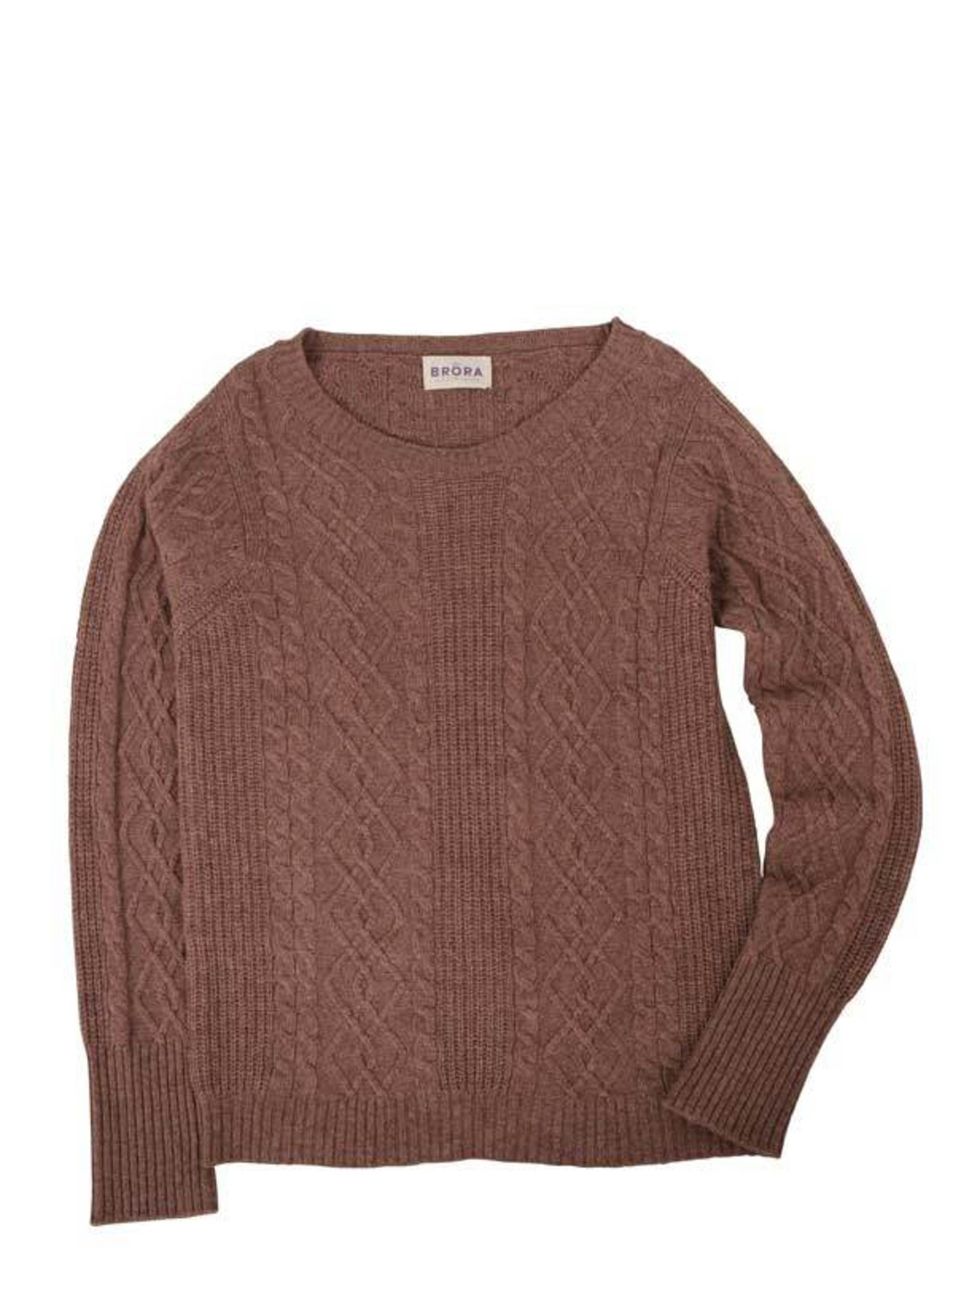 <p>Brora cable knit sweater, £289, for stockists call 0845 659 9944 </p>